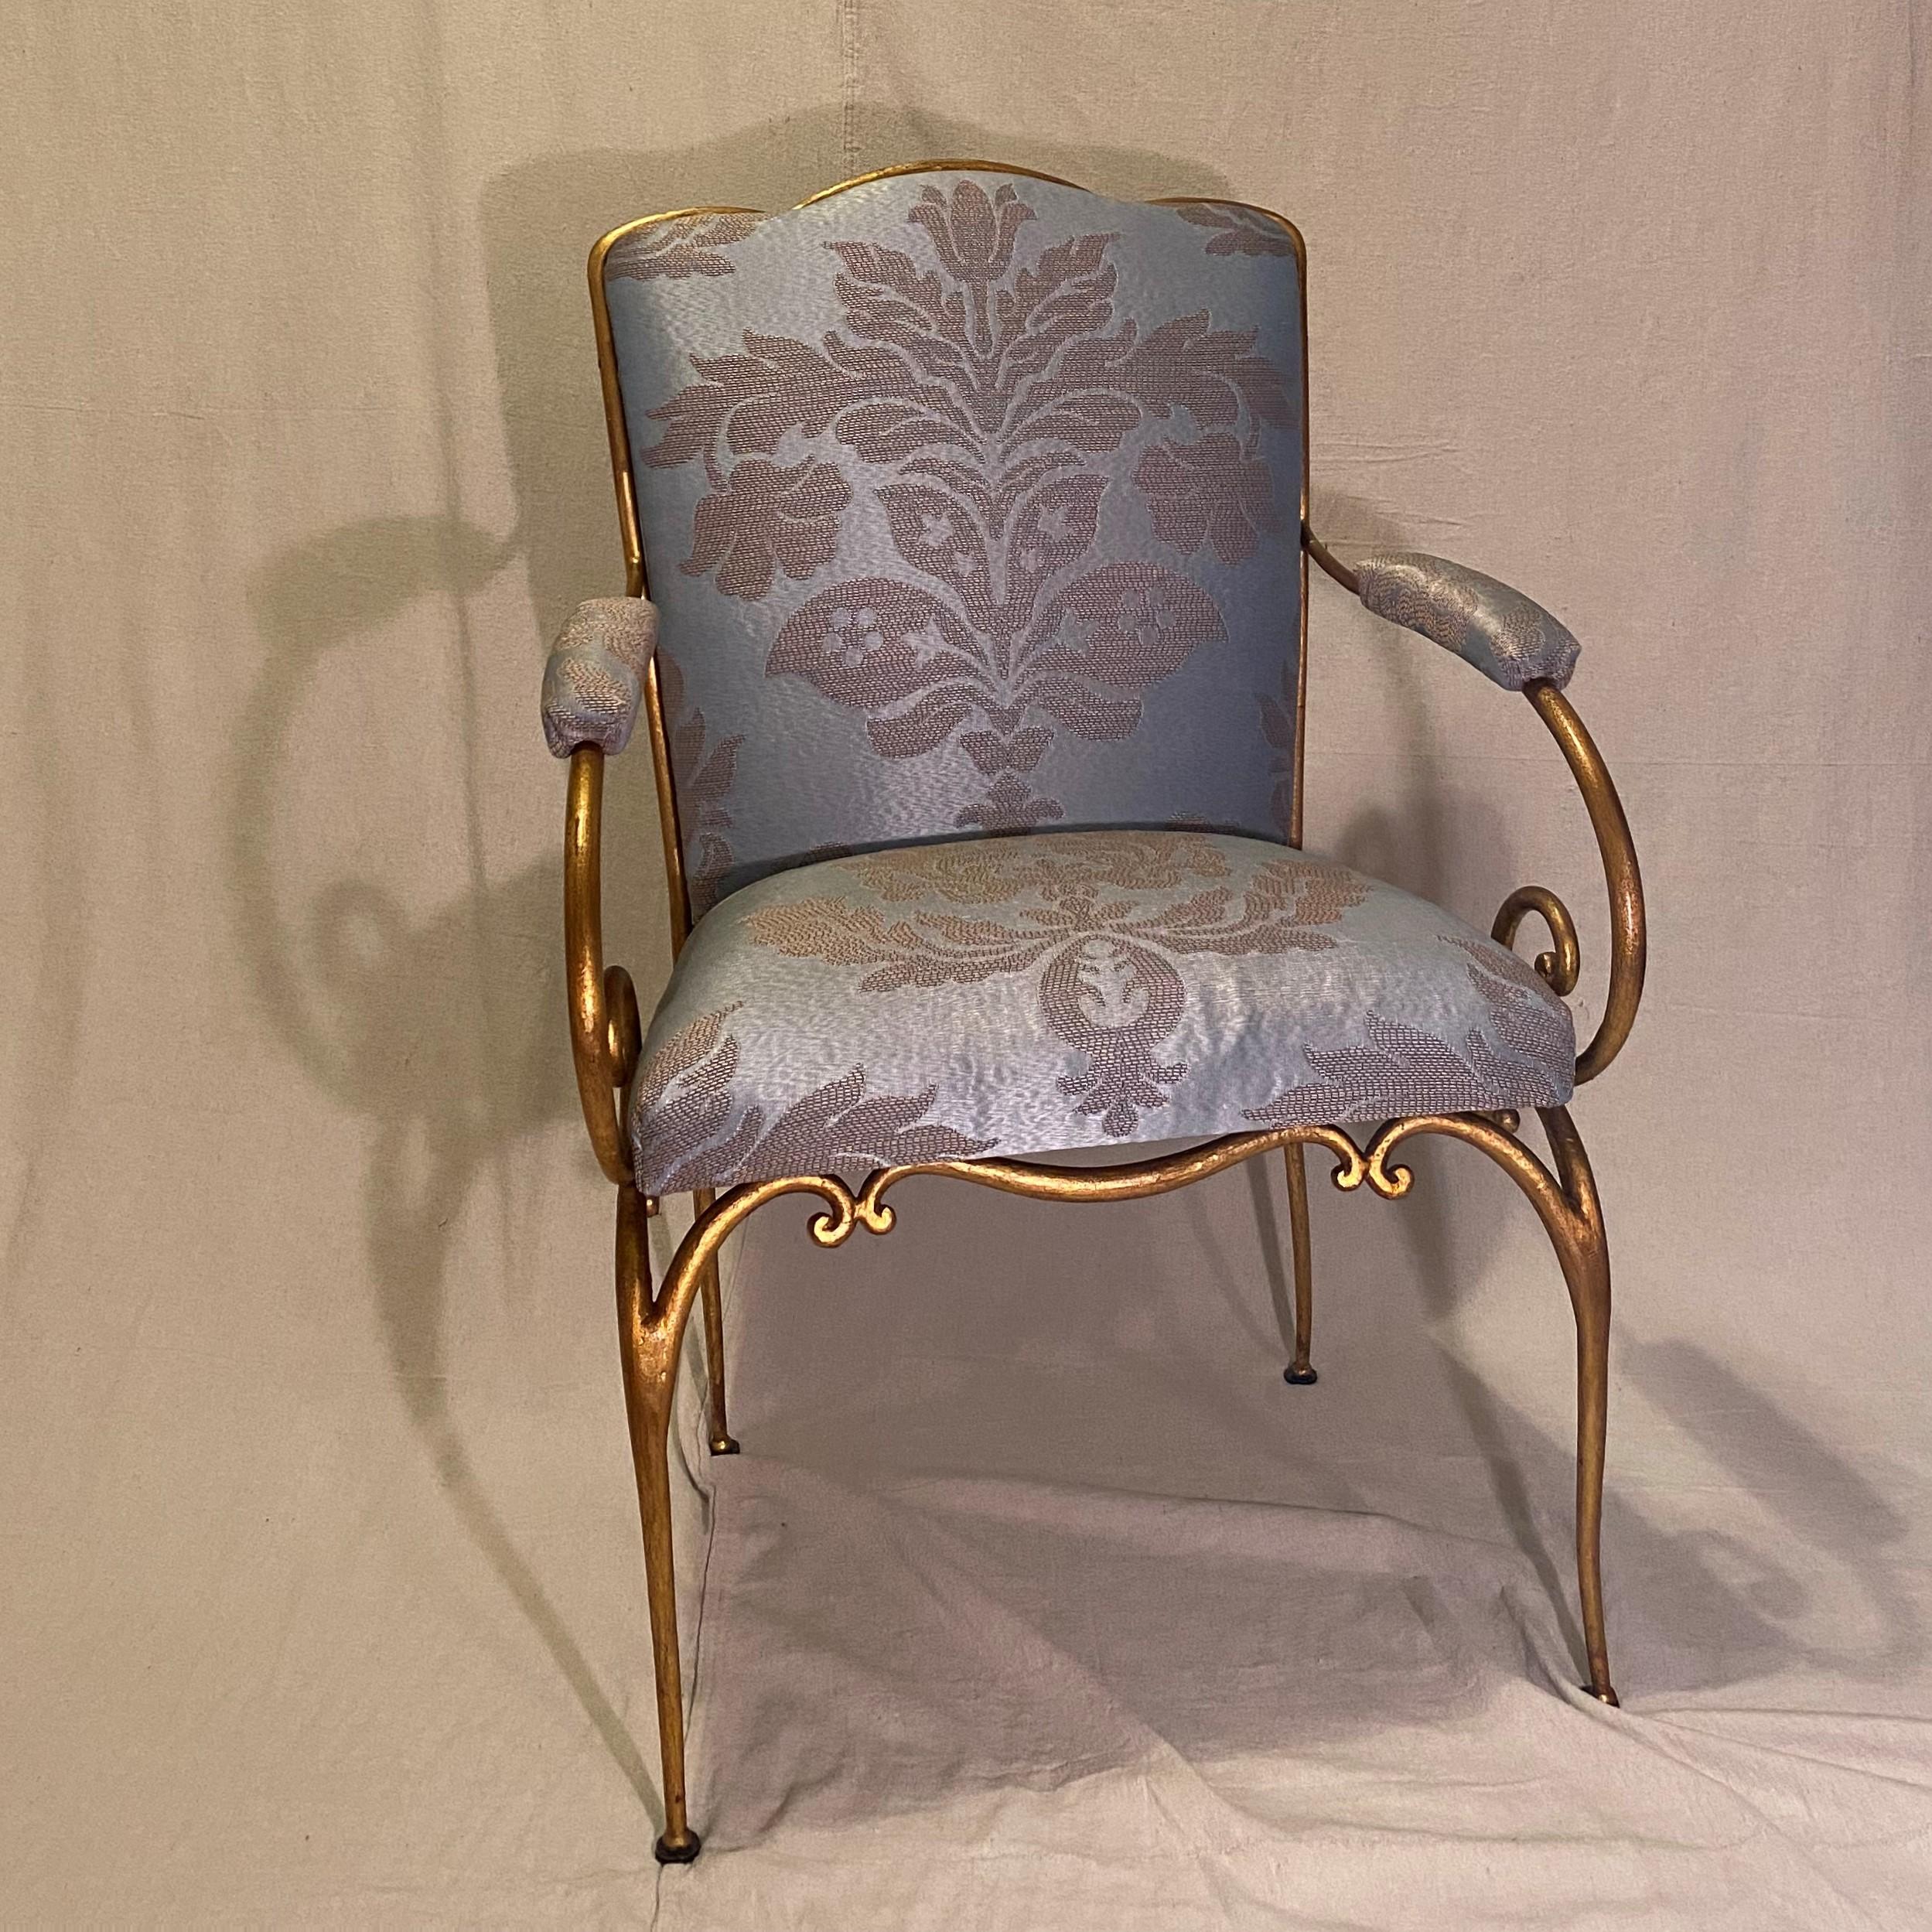 Pair of French Art Deco / Art Modern custom armchairs circa 1940. By designer Rene Drouet. Gold gilded Iron with a silk damask upholstery fabric by Christopher Hyland. Not part of Drouet’s production line of furniture. Purchased originally through